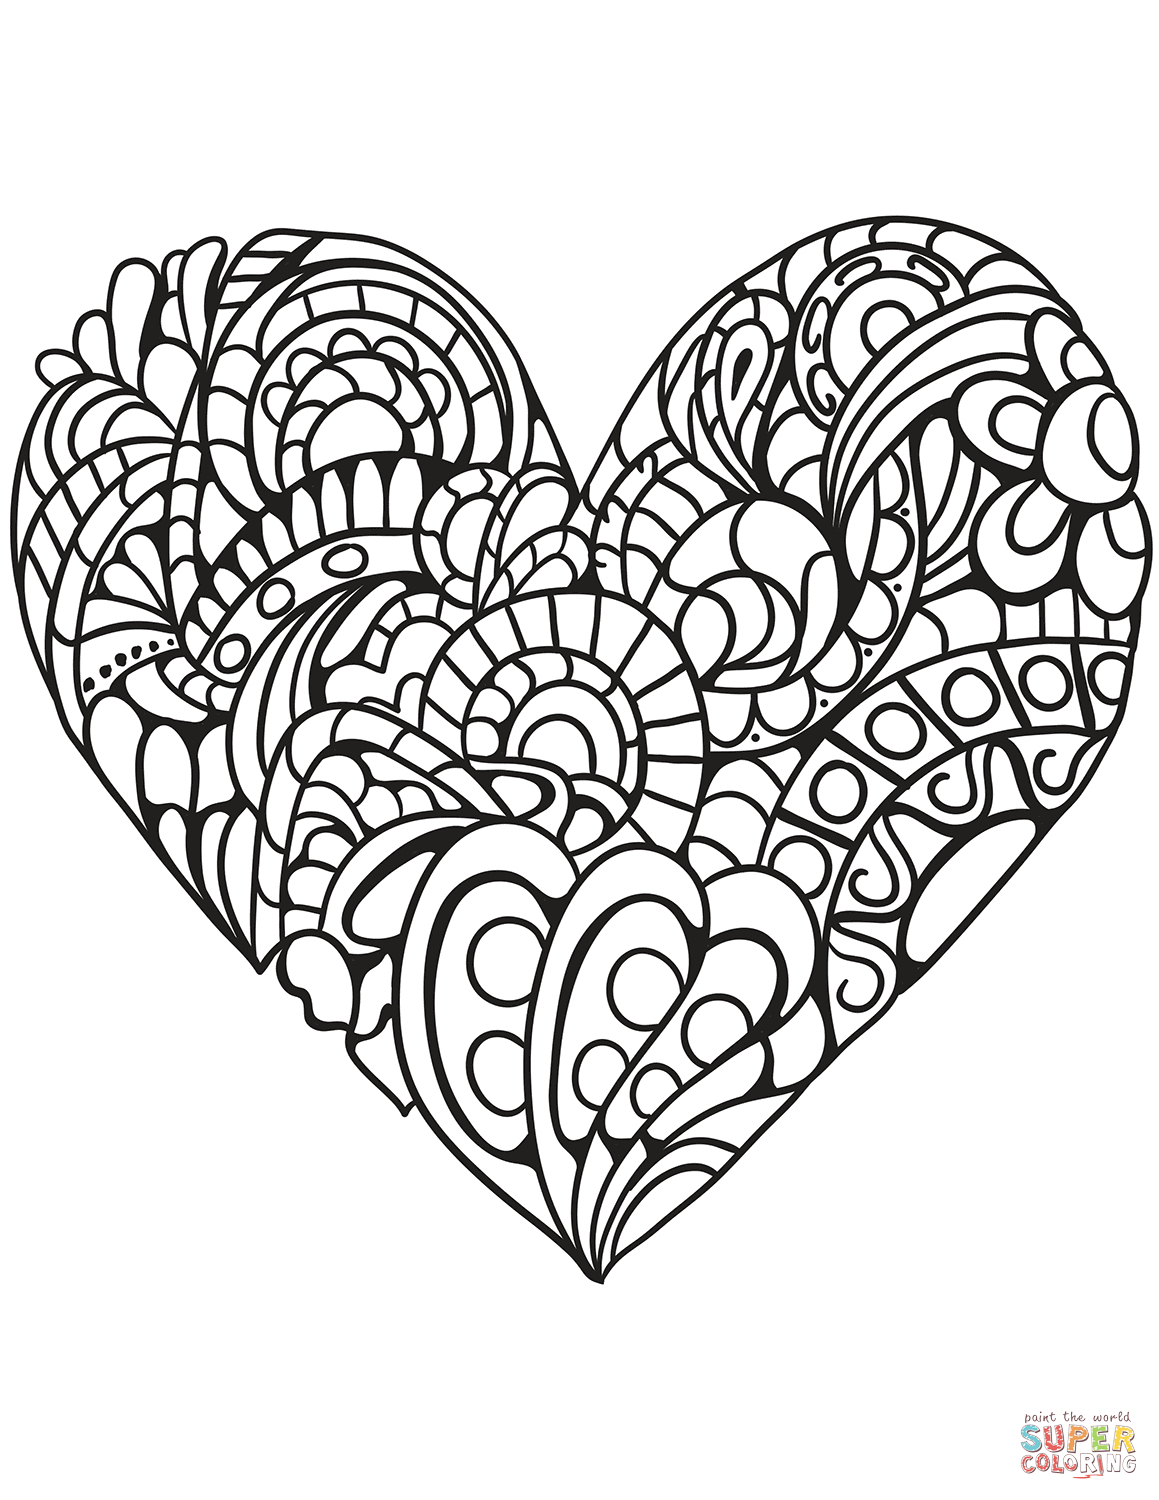 Heart Coloring Pages | Free Printable Pictures - Free Printable Heart Coloring Pages